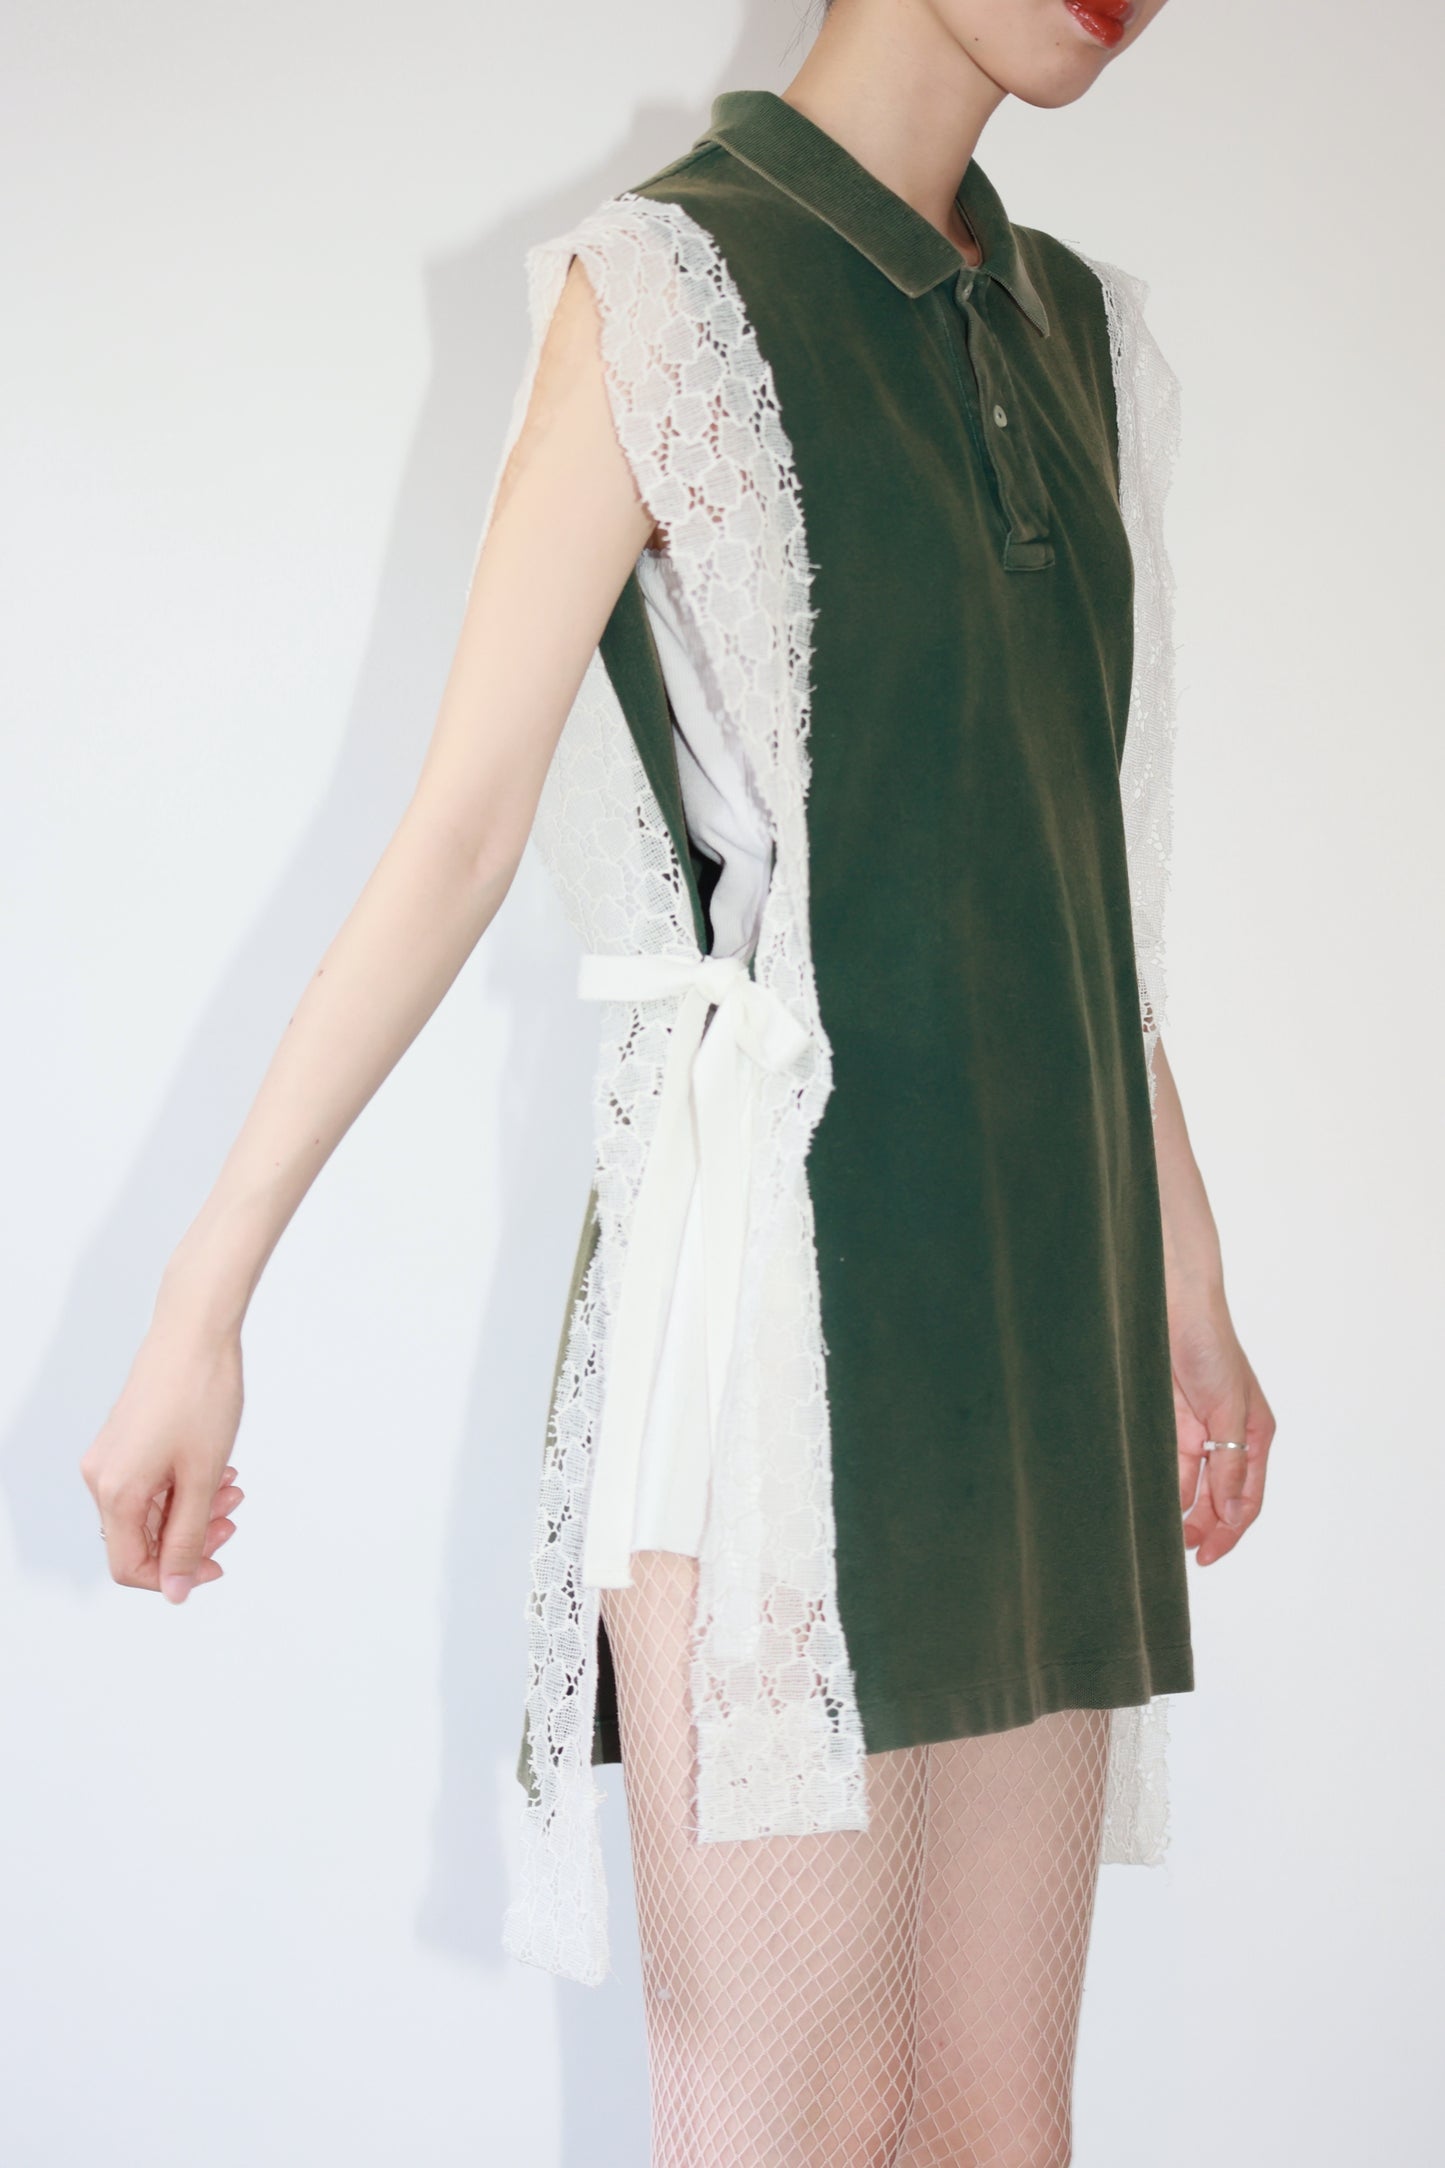 POTTOxUDW UP-CYCLED PIGMENT-DYED GILET, MOSS-GREEN, LACE